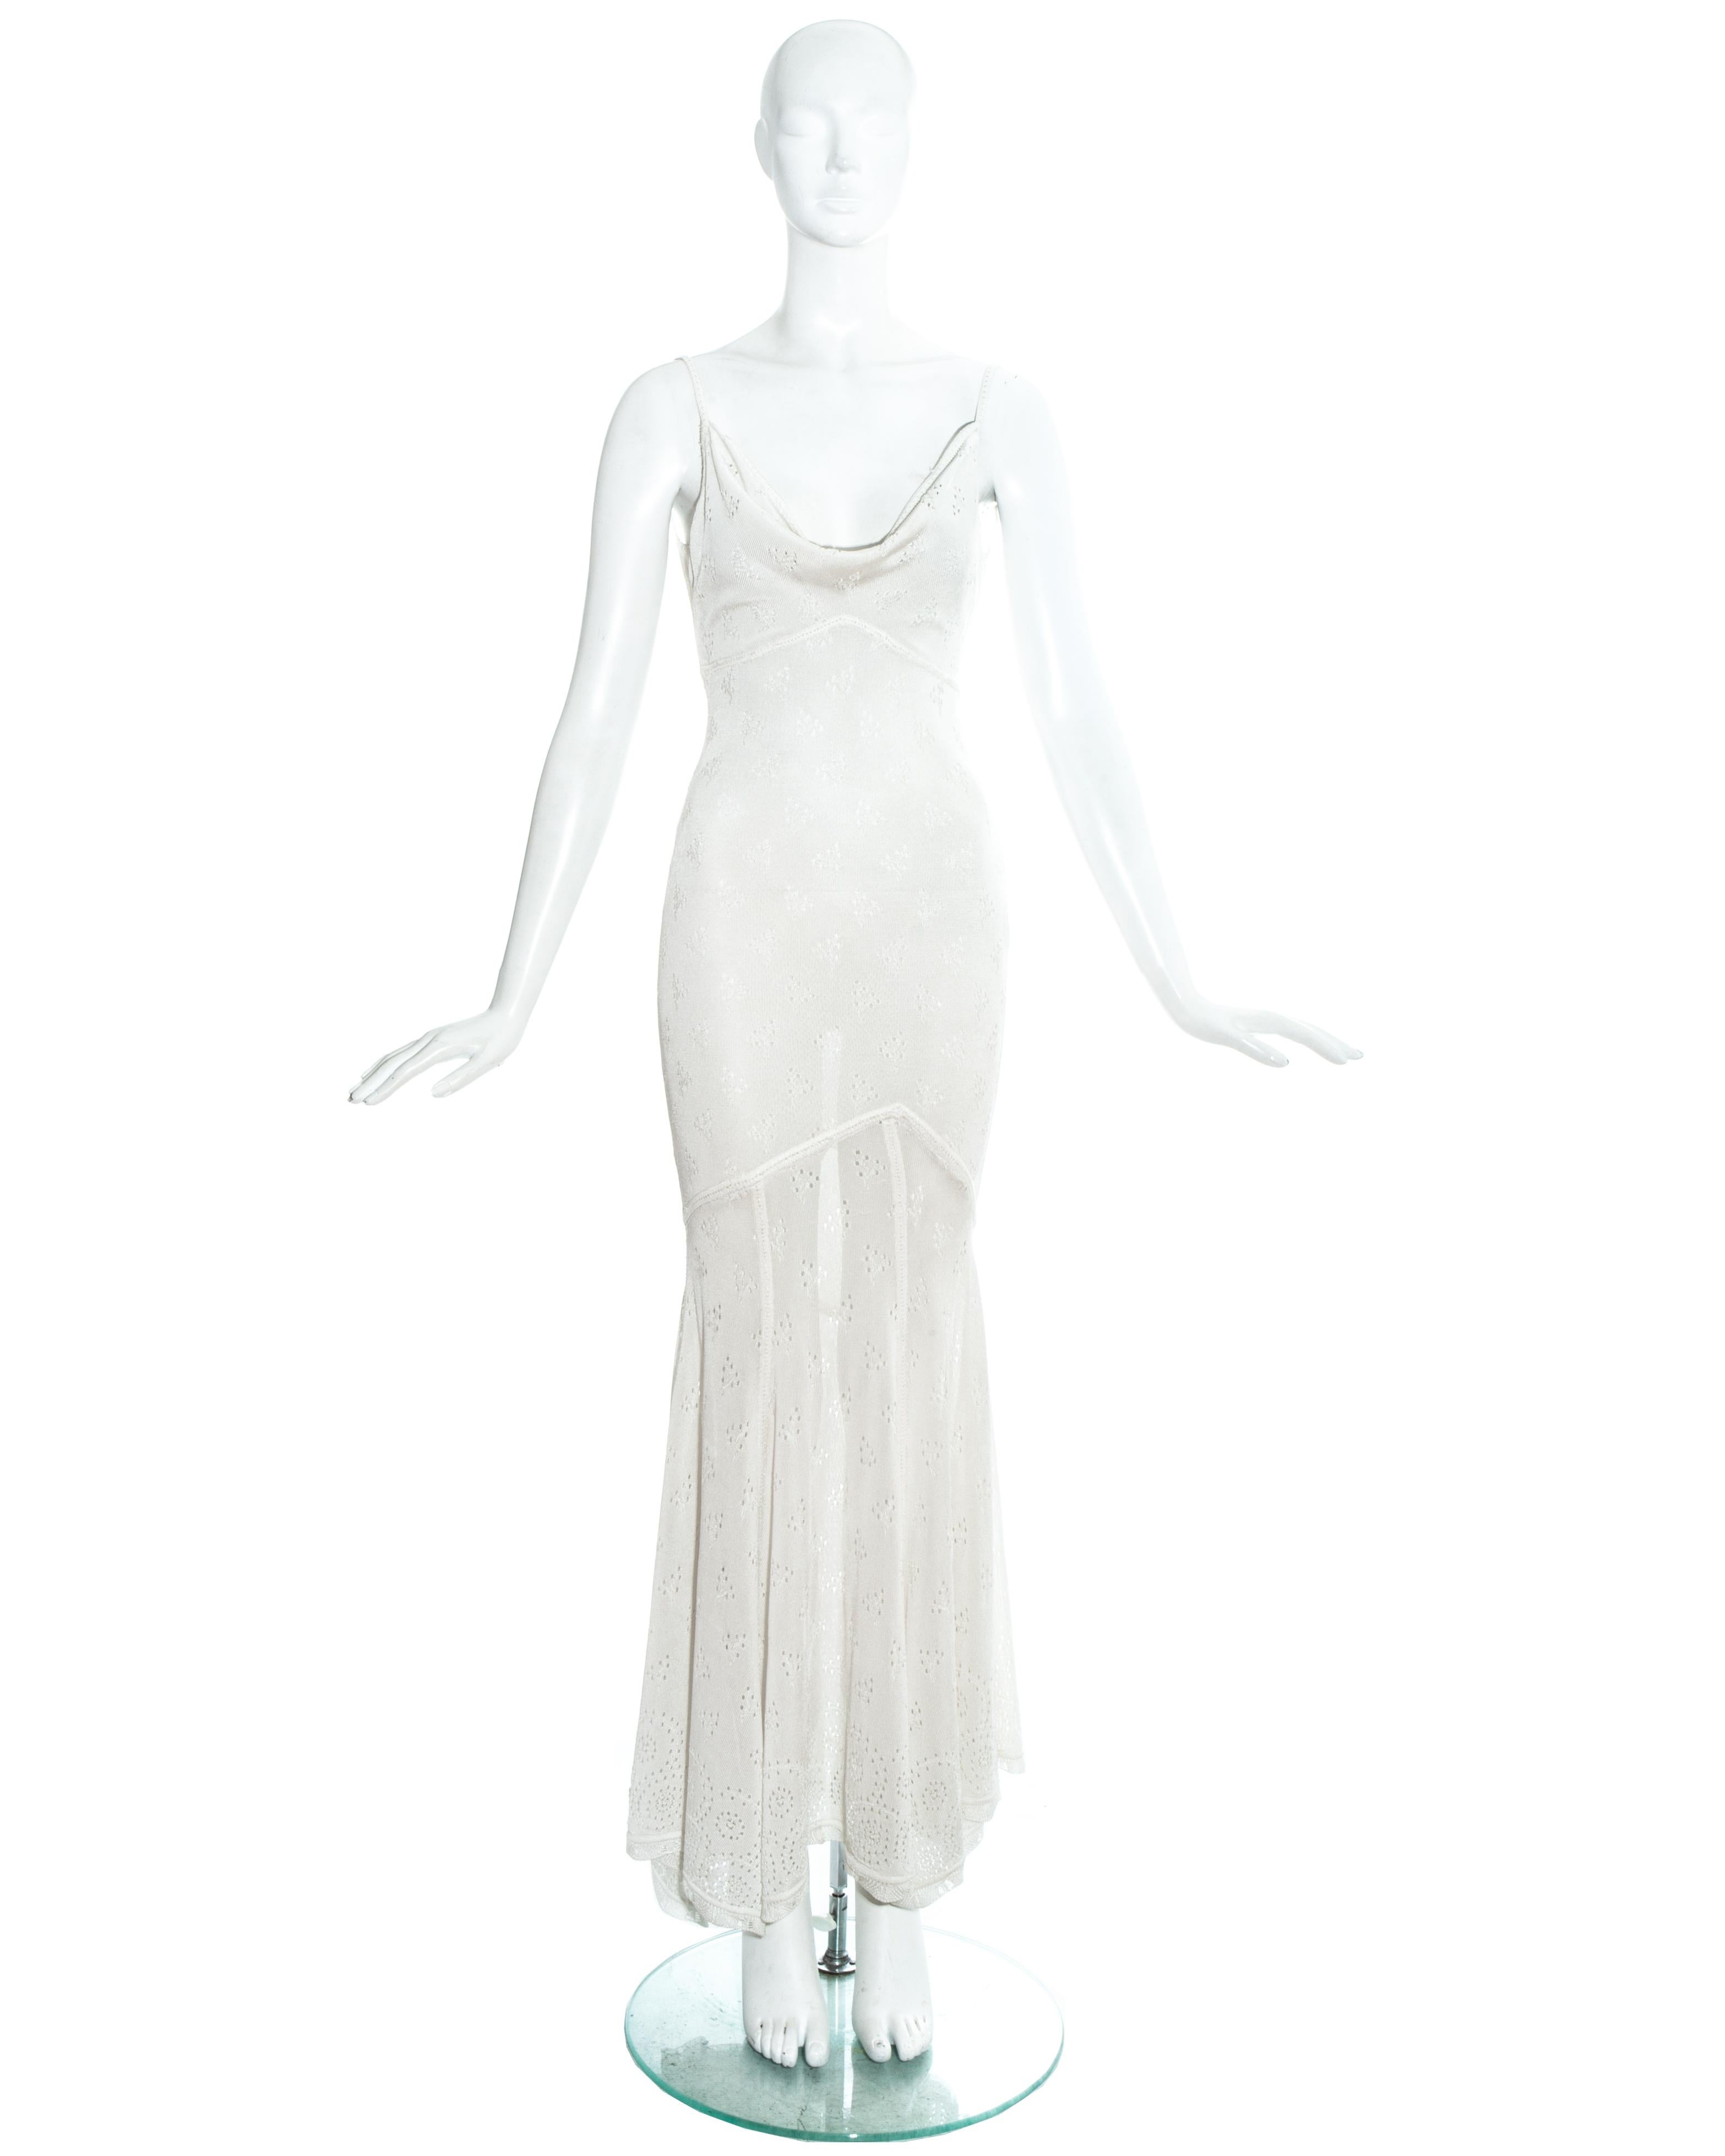 John Galliano crochet knitted maxi dress with low back and cowl neckline.

Spring-Summer 2000